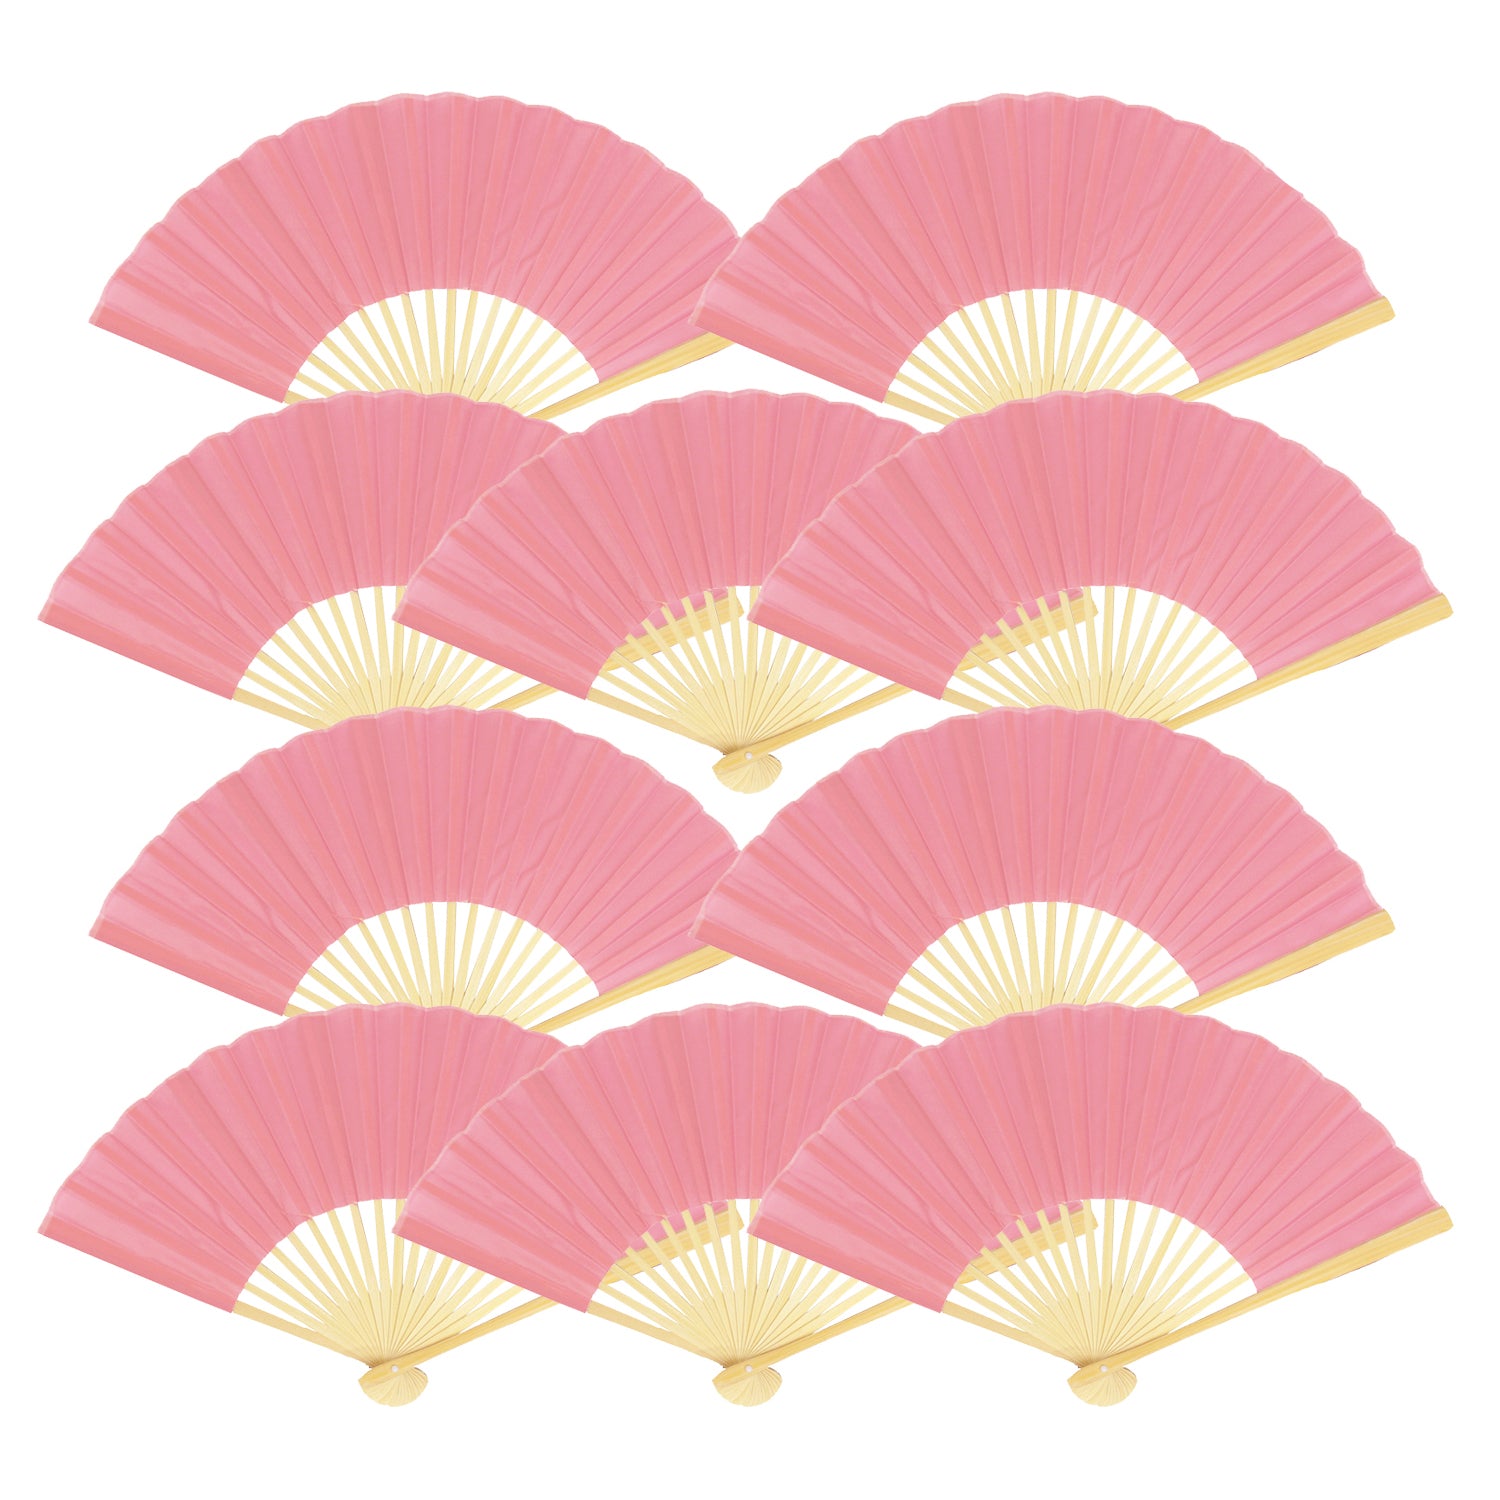 9" Pink Silk Hand Fans for Weddings (10 Pack)